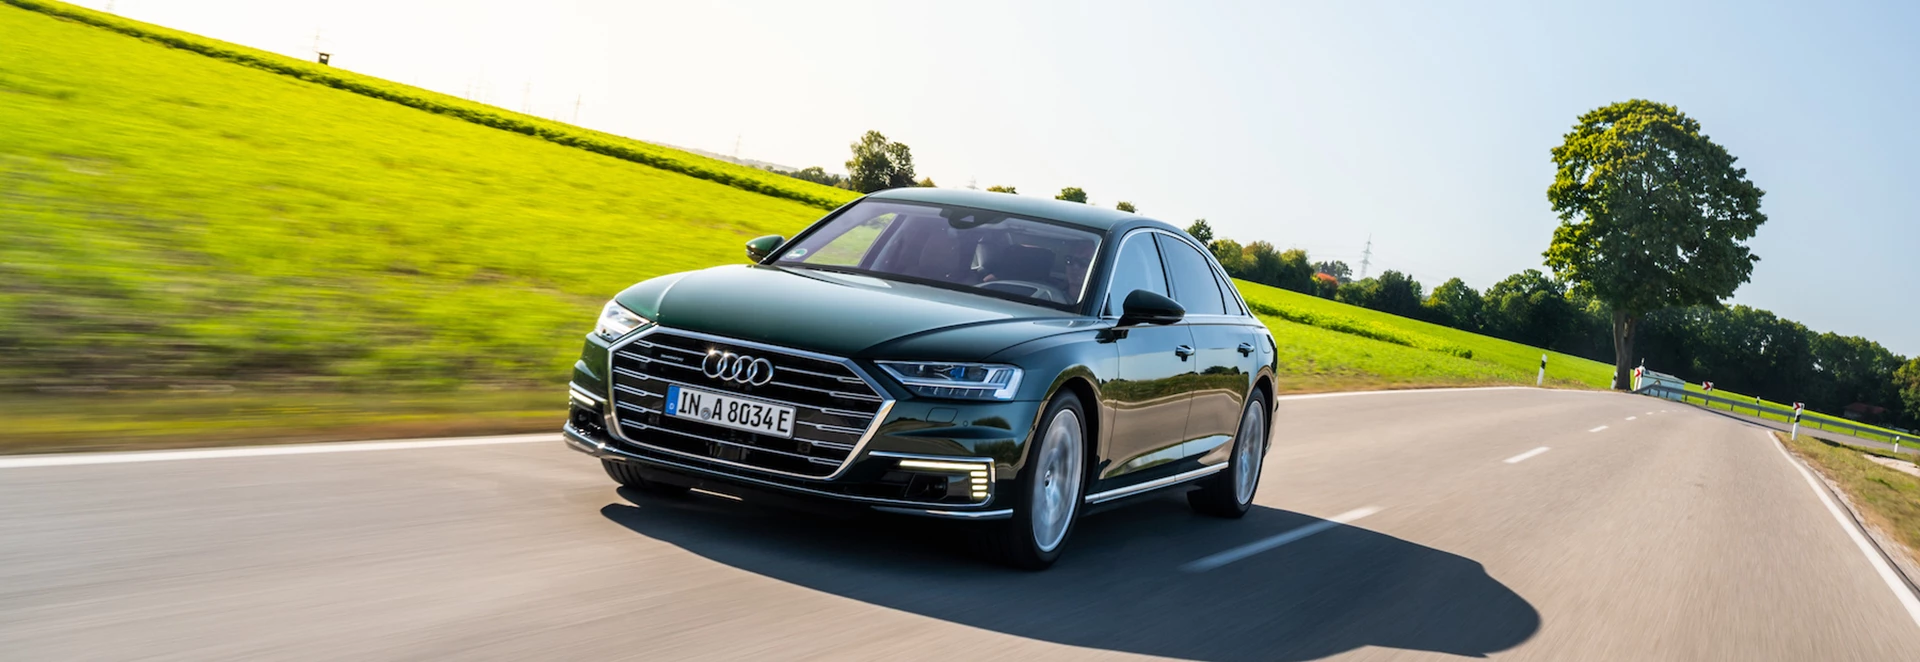 Audi announces further details on flagship A8 plug-in hybrid